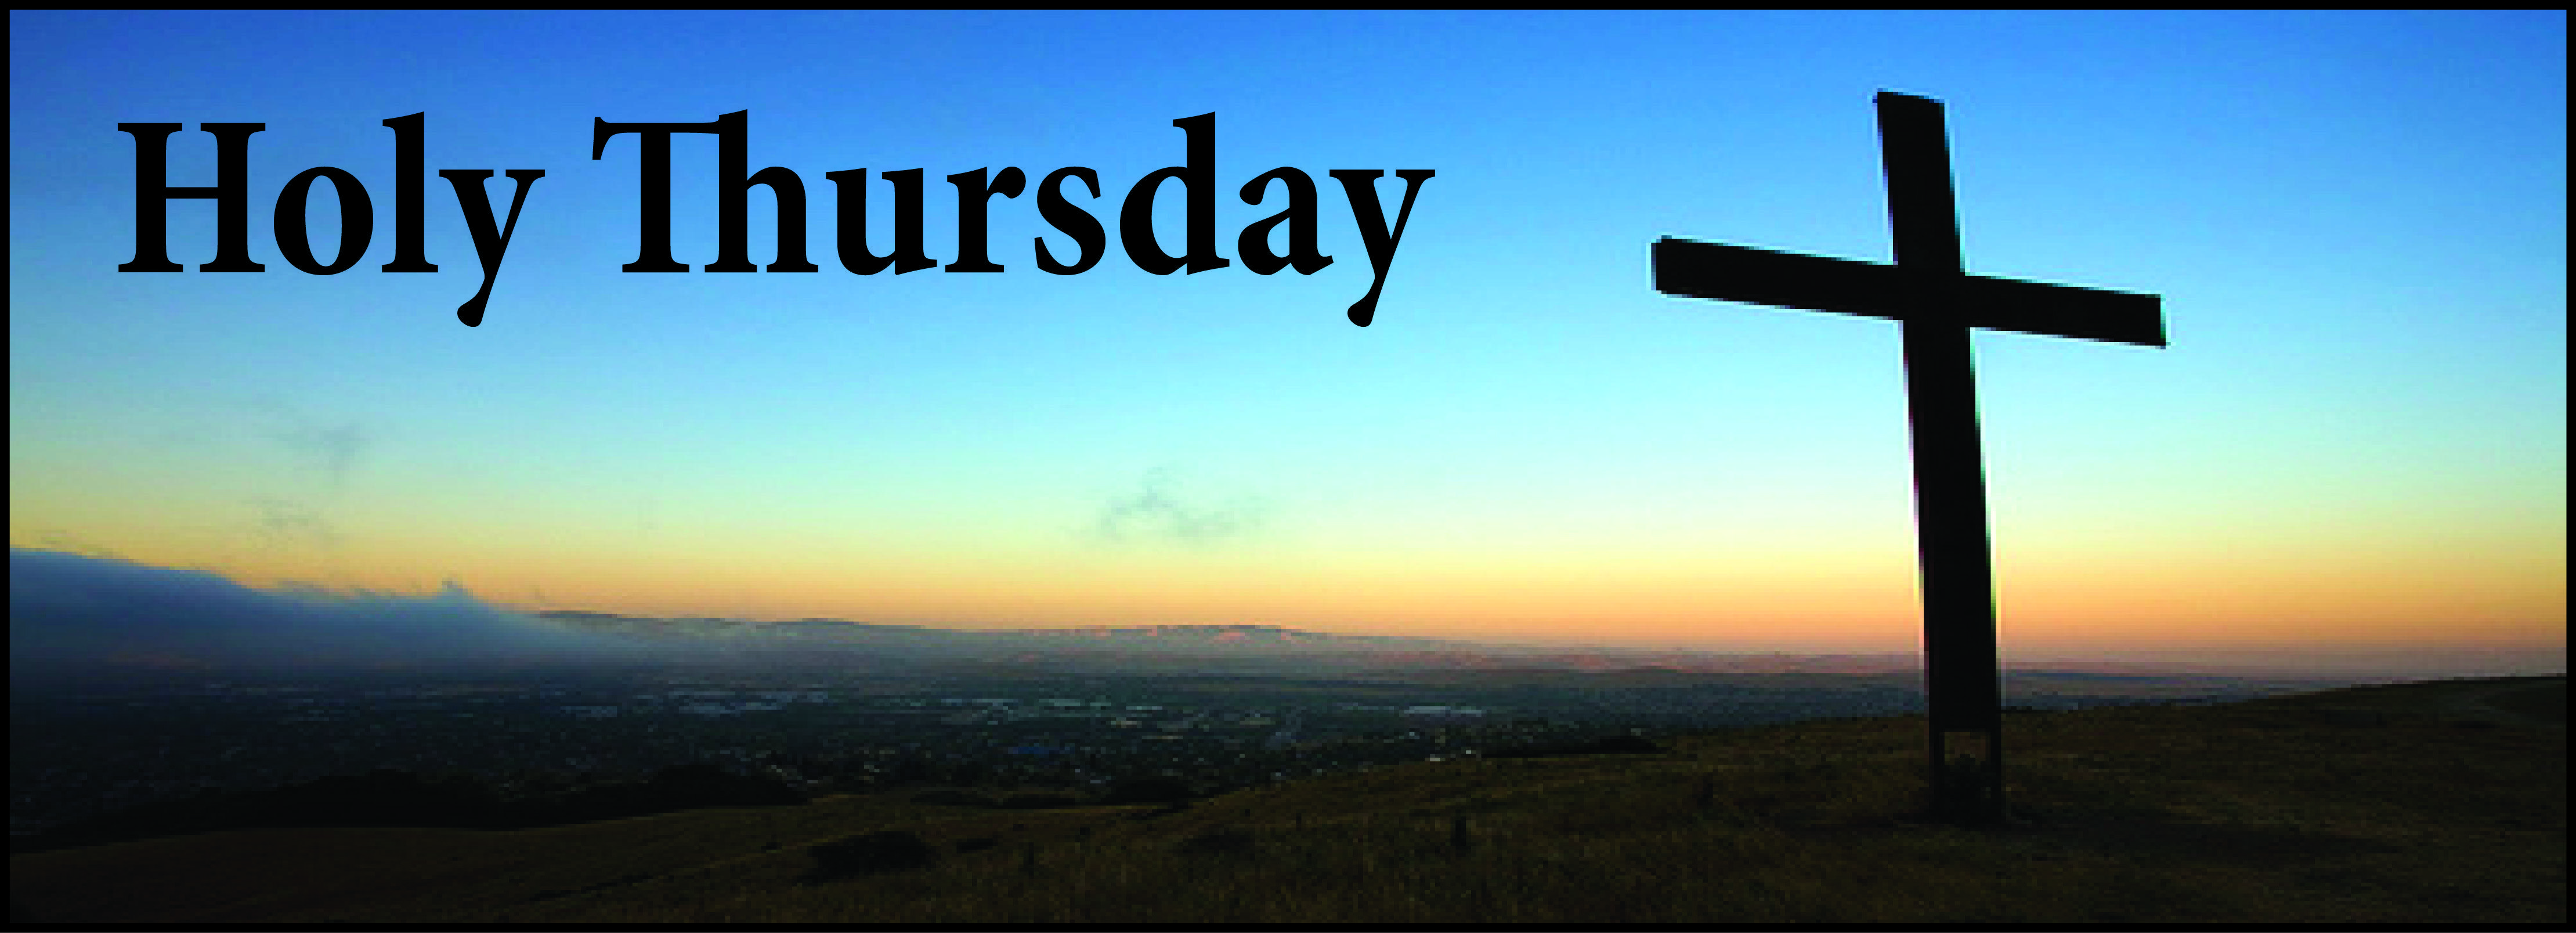 Adorabl Holy Thursday Wish Picture And Photo